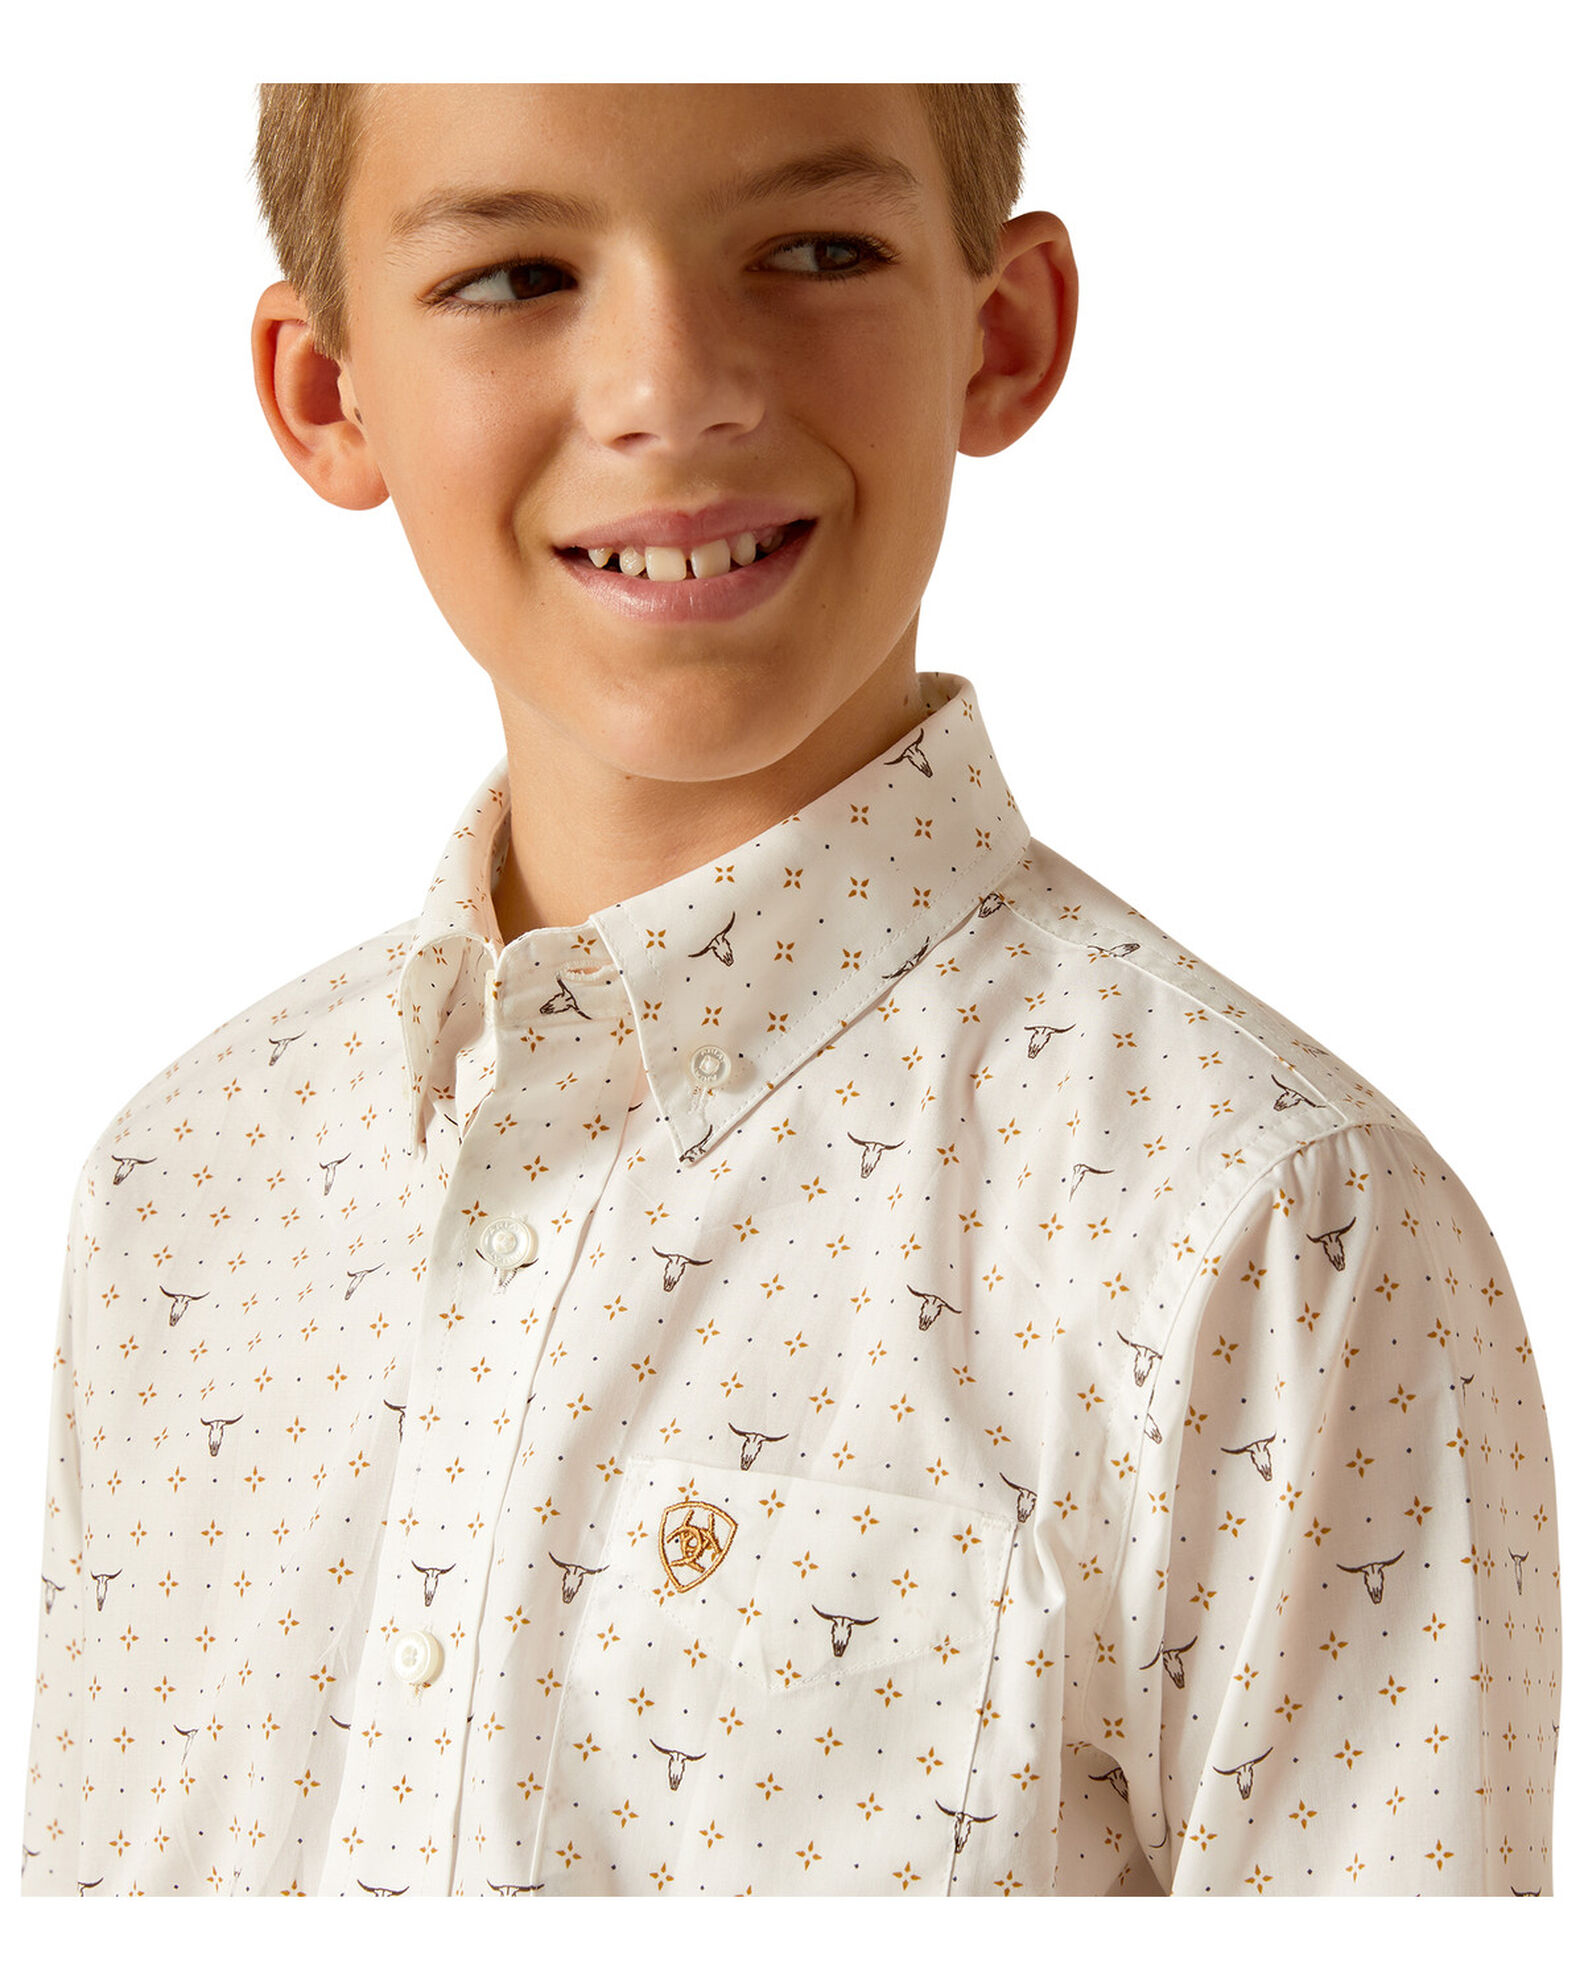 Product Name: Ariat Boys' Steer Print Long Sleeve Button-Down Western Shirt